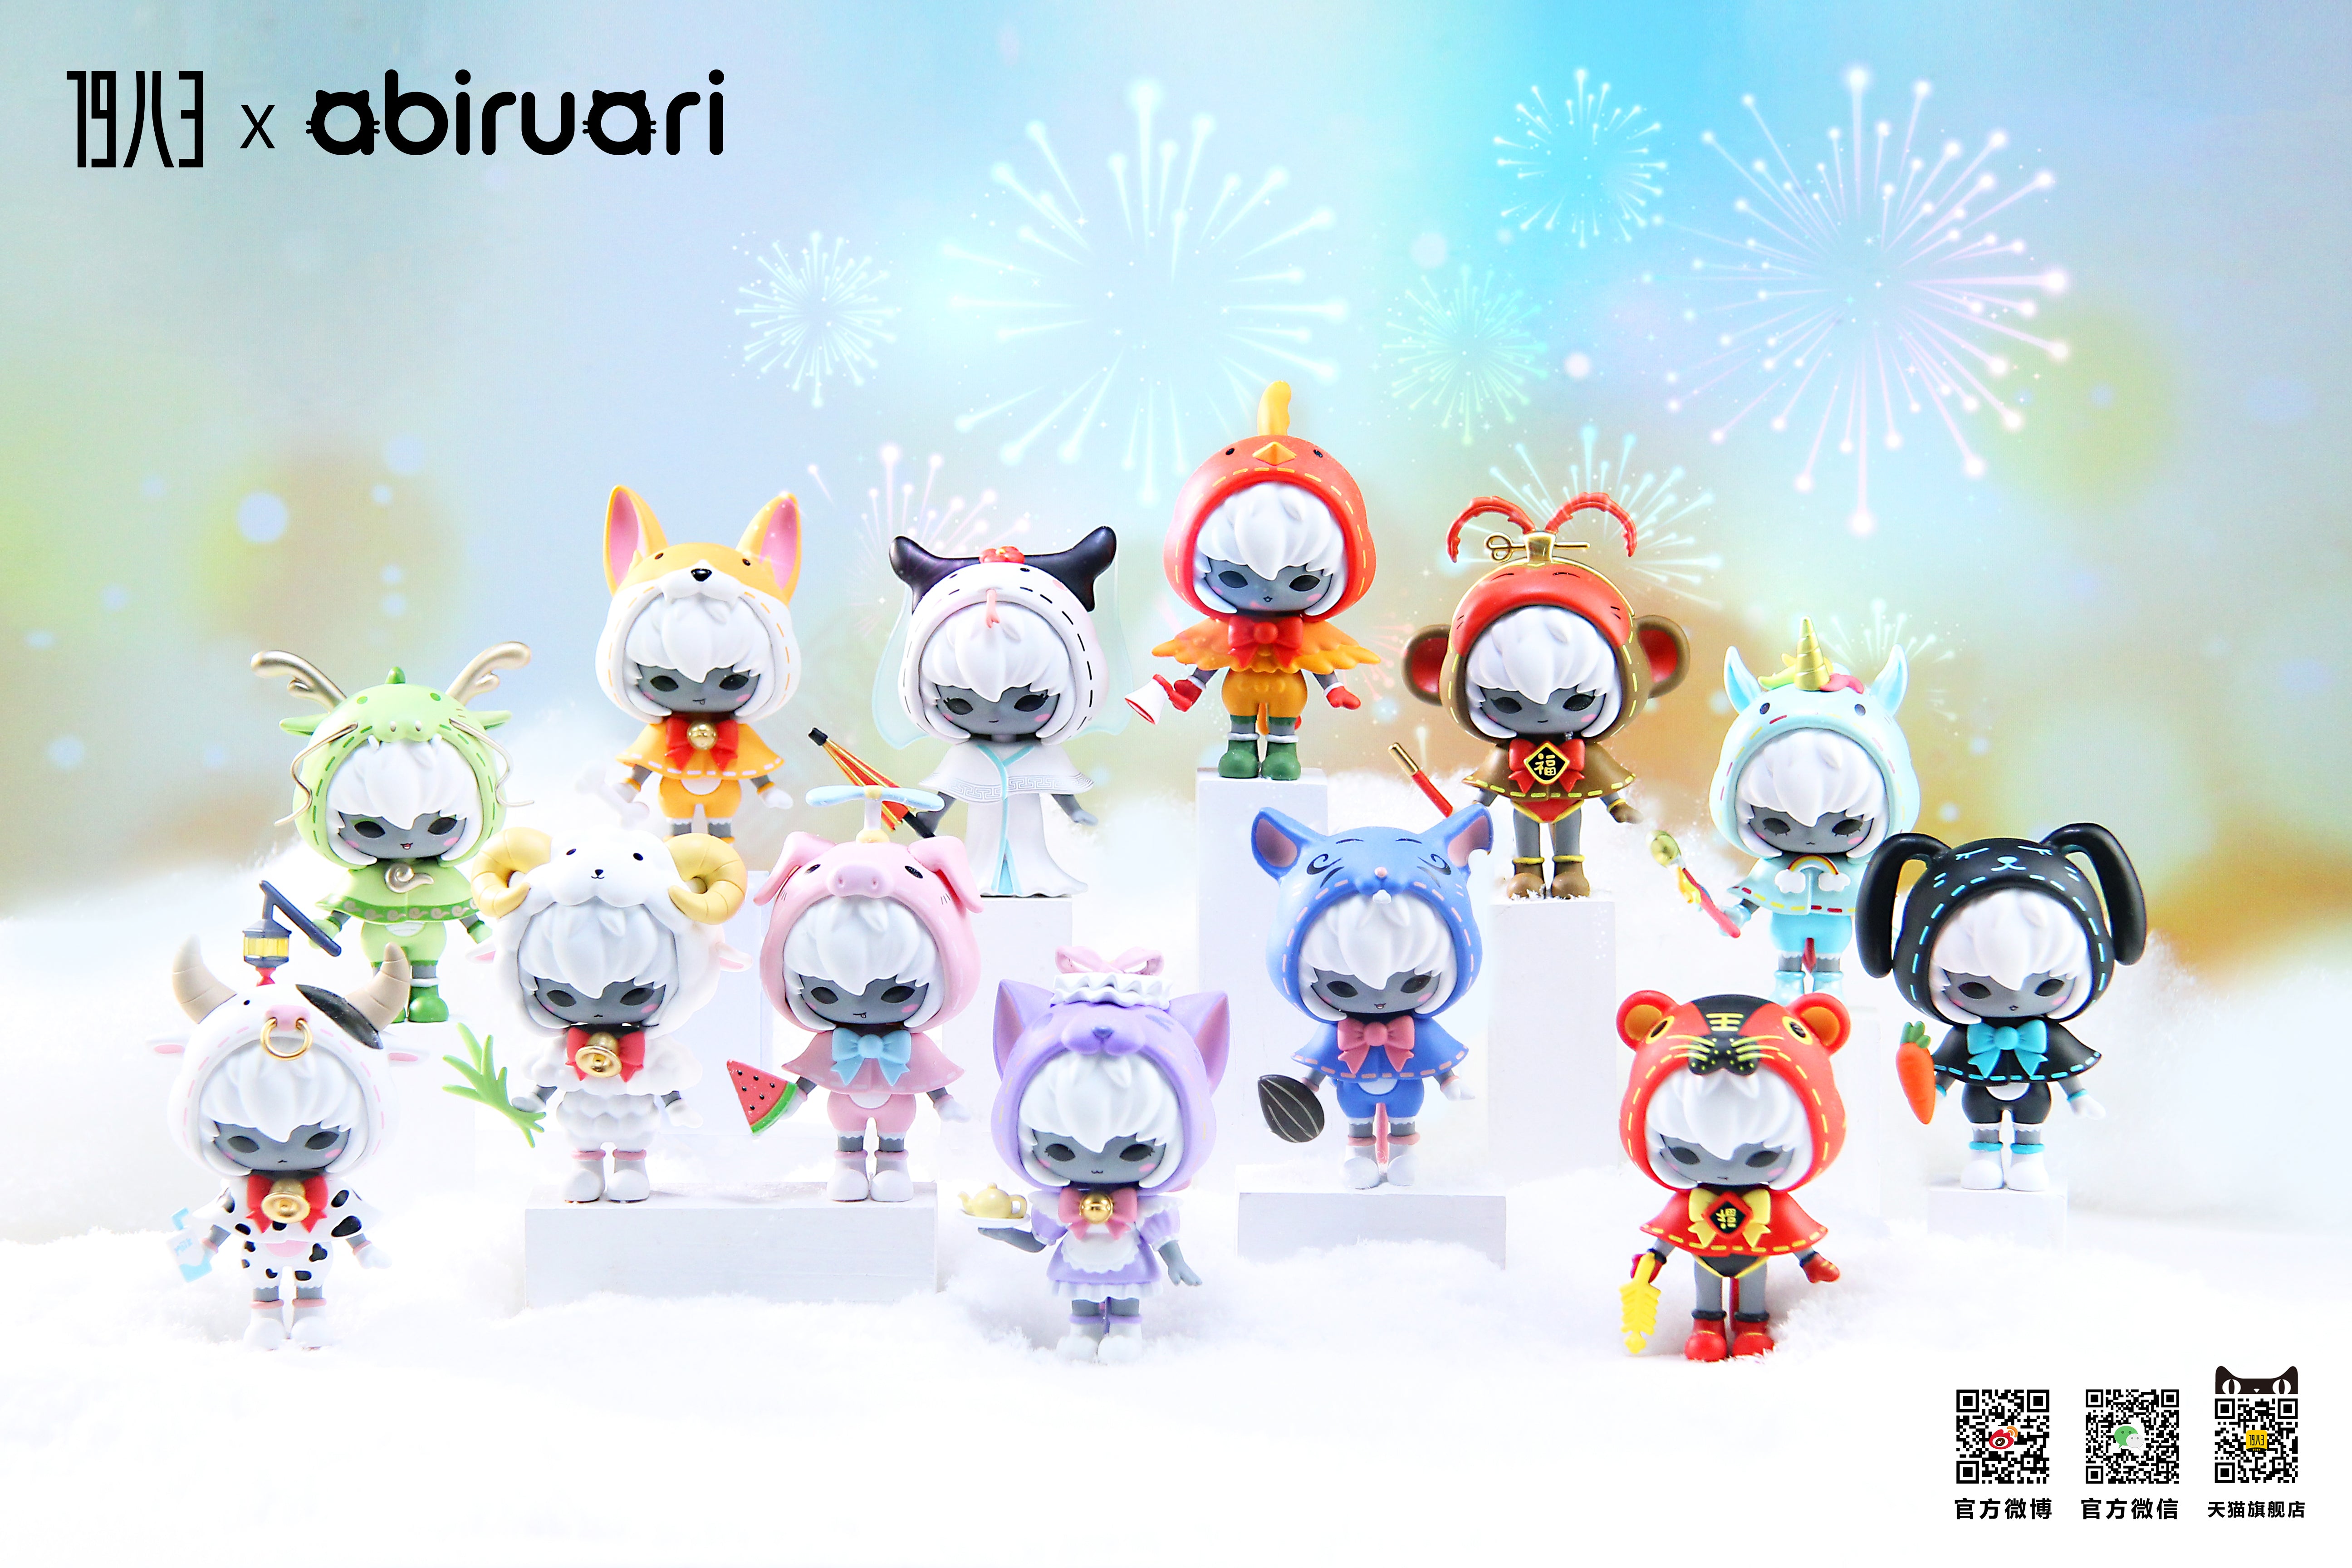 Abiru Chinese Zodiac toy figurines, including cartoon characters and animal figures, displayed in a group.